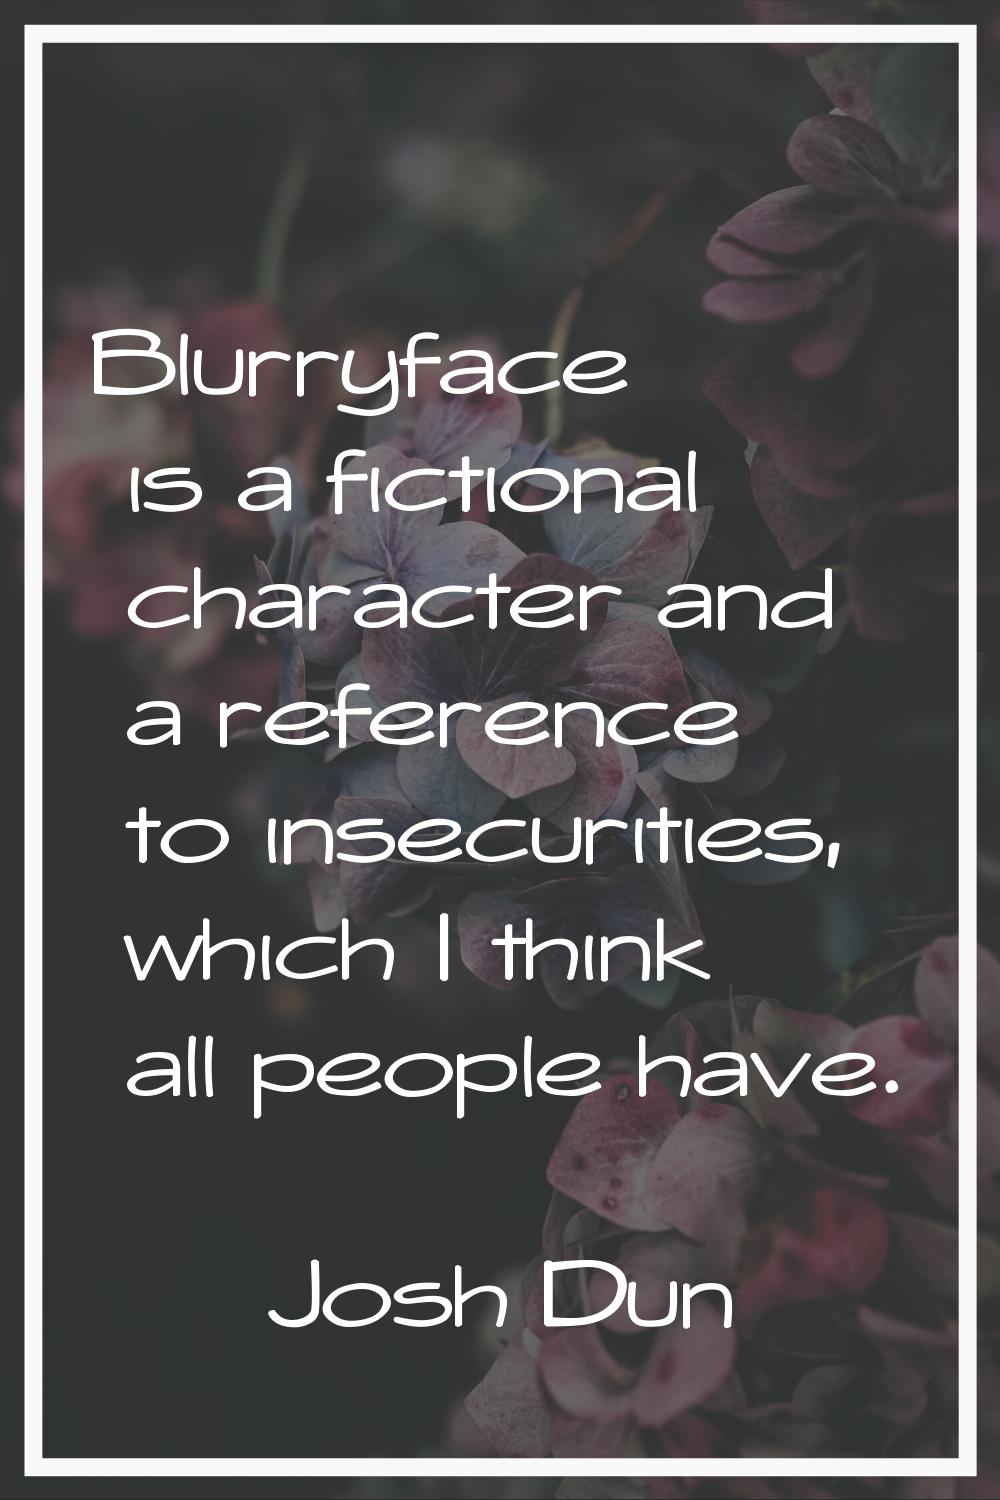 Blurryface is a fictional character and a reference to insecurities, which I think all people have.